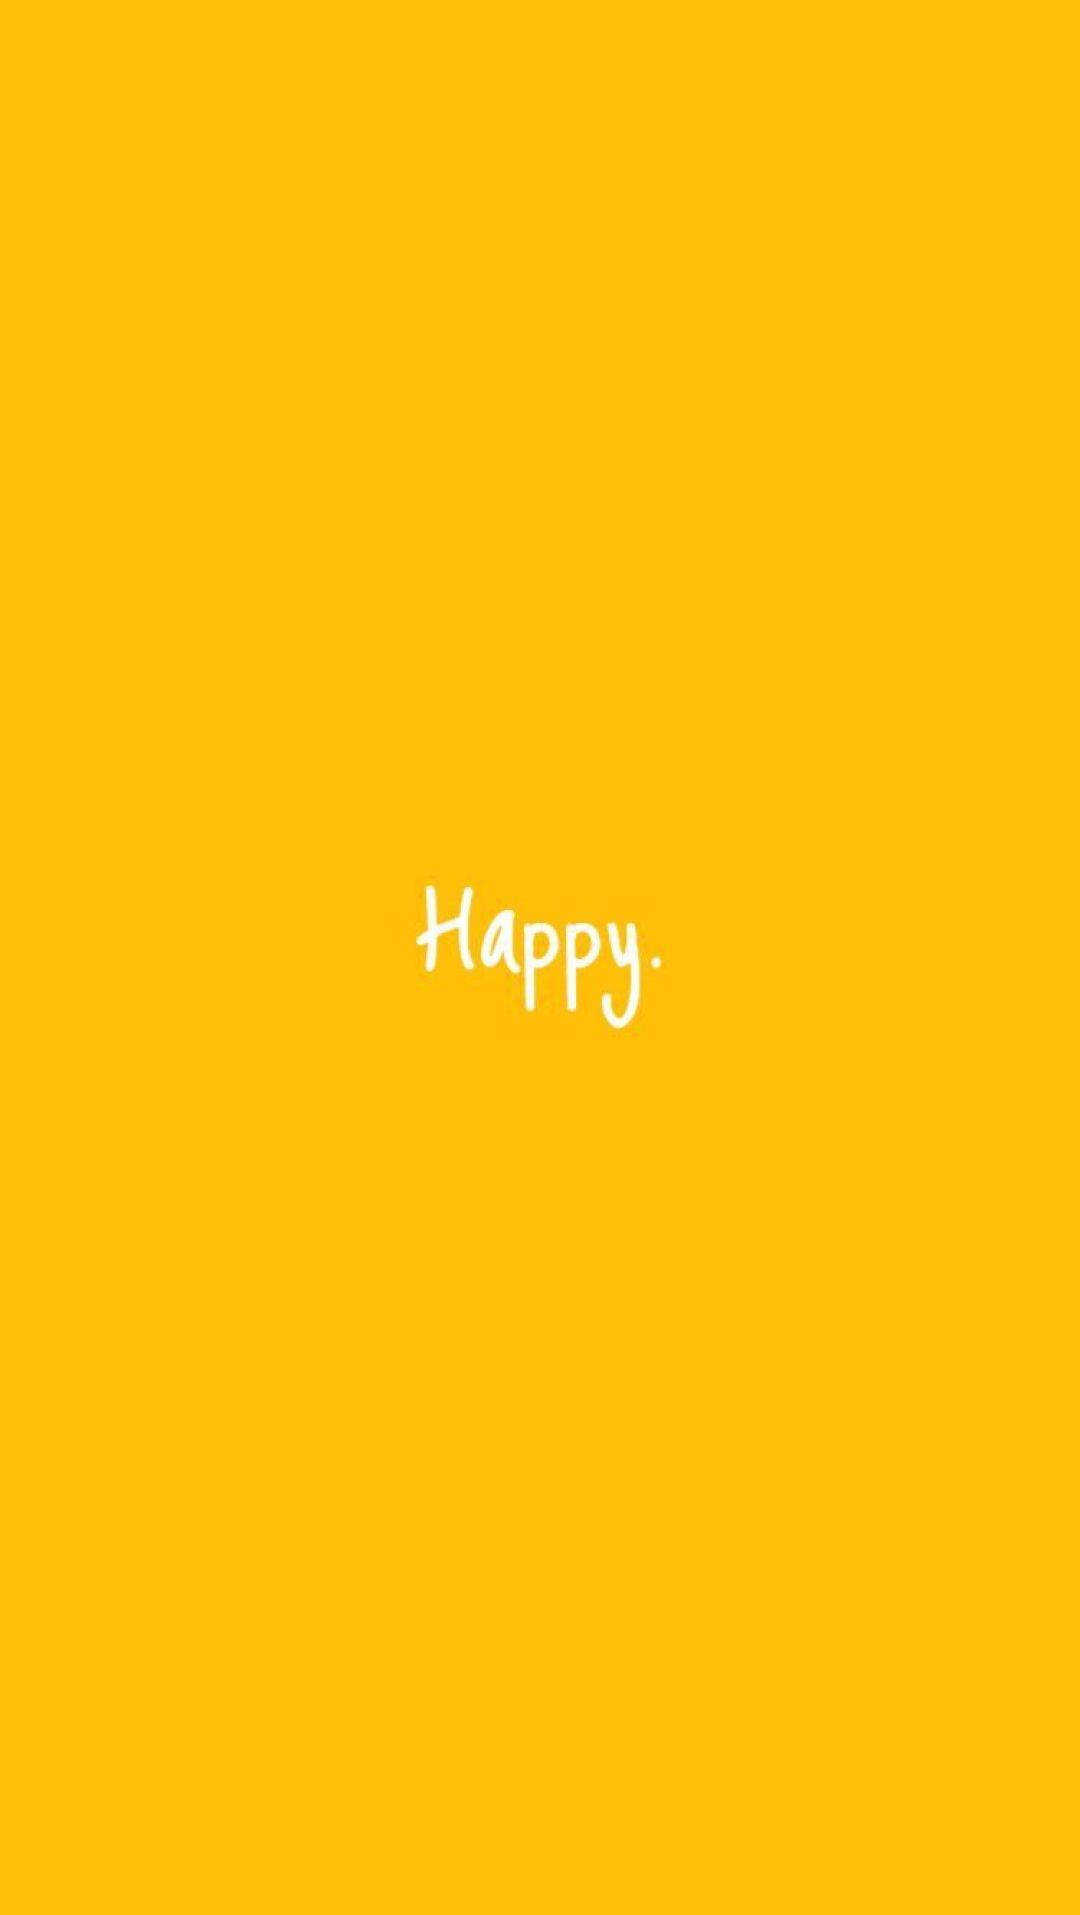 "Bring on the sunshine with this cheery yellow aesthetic" Wallpaper